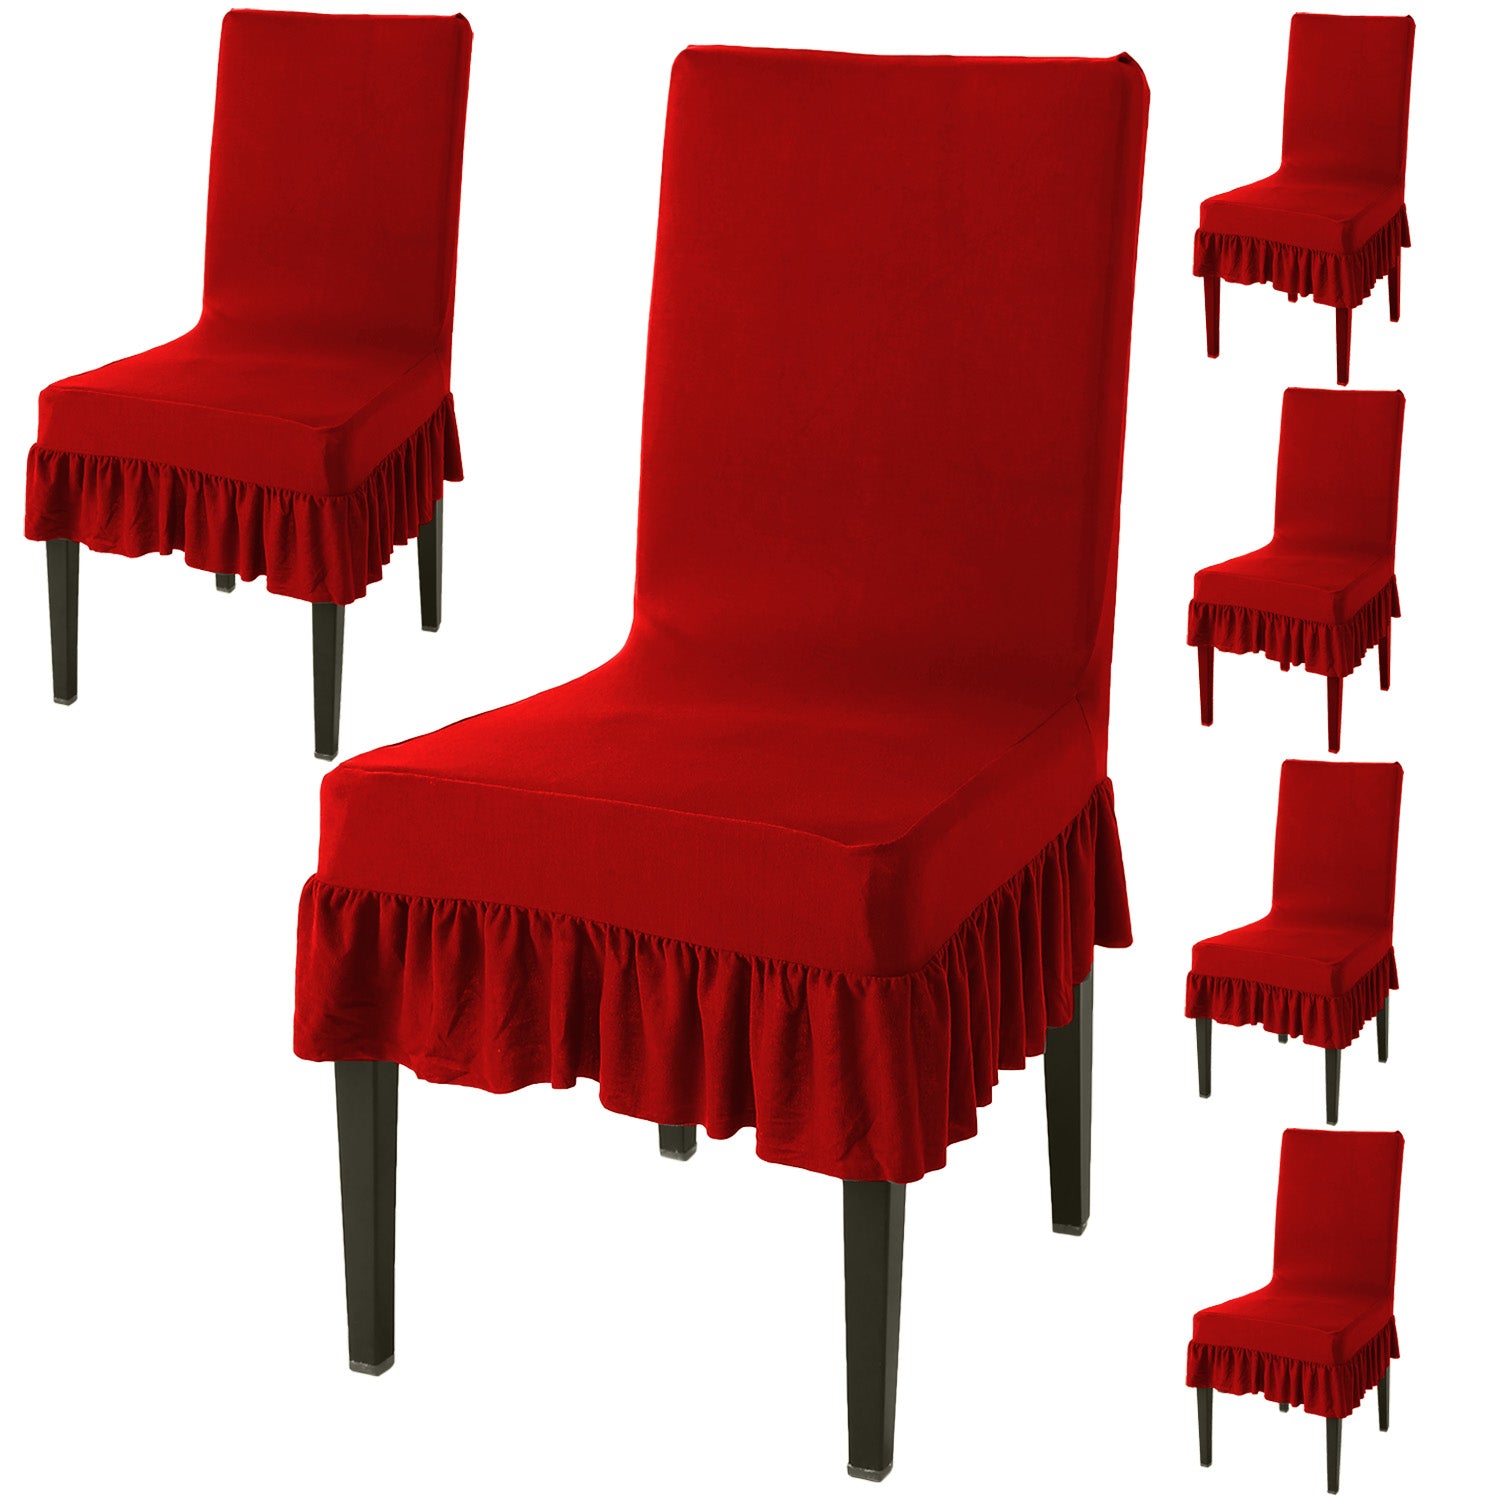 Elastic Stretchable Dining Chair Cover with Frill, Scarlet Red